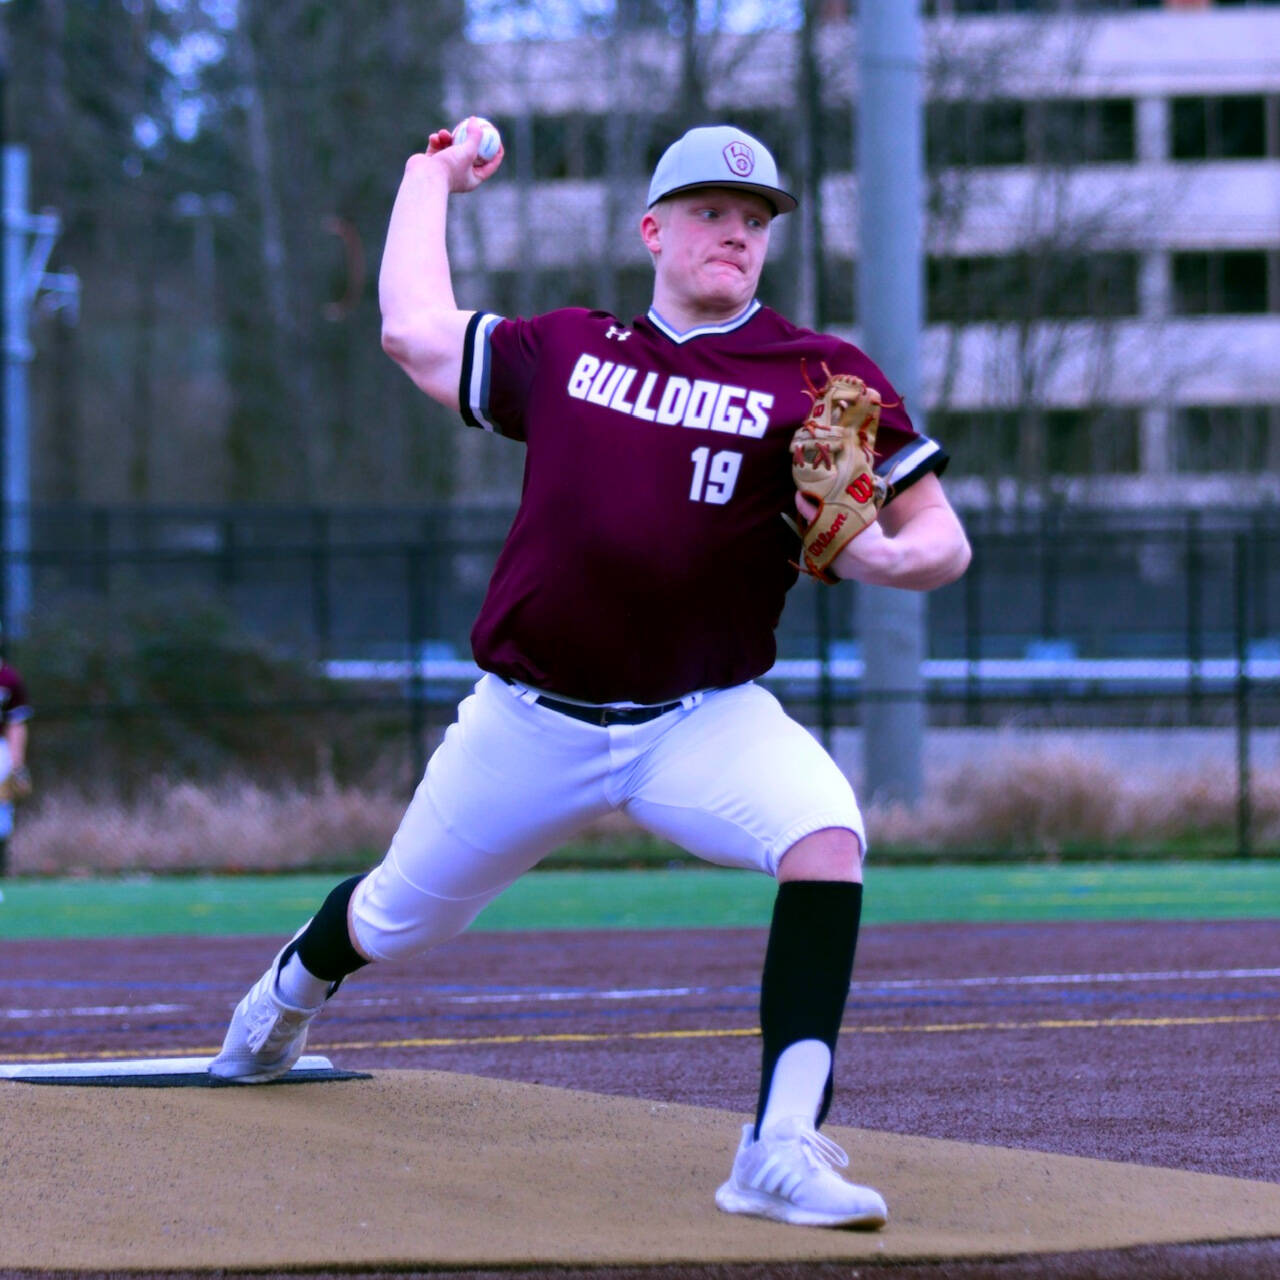 PHOTO BY HAILEY BLANCAS Montesano senior Cam Taylor throws a pitch during a 7-2 loss to Overlake-Bear Creek on Saturday at Marymoor Park in Redmond.